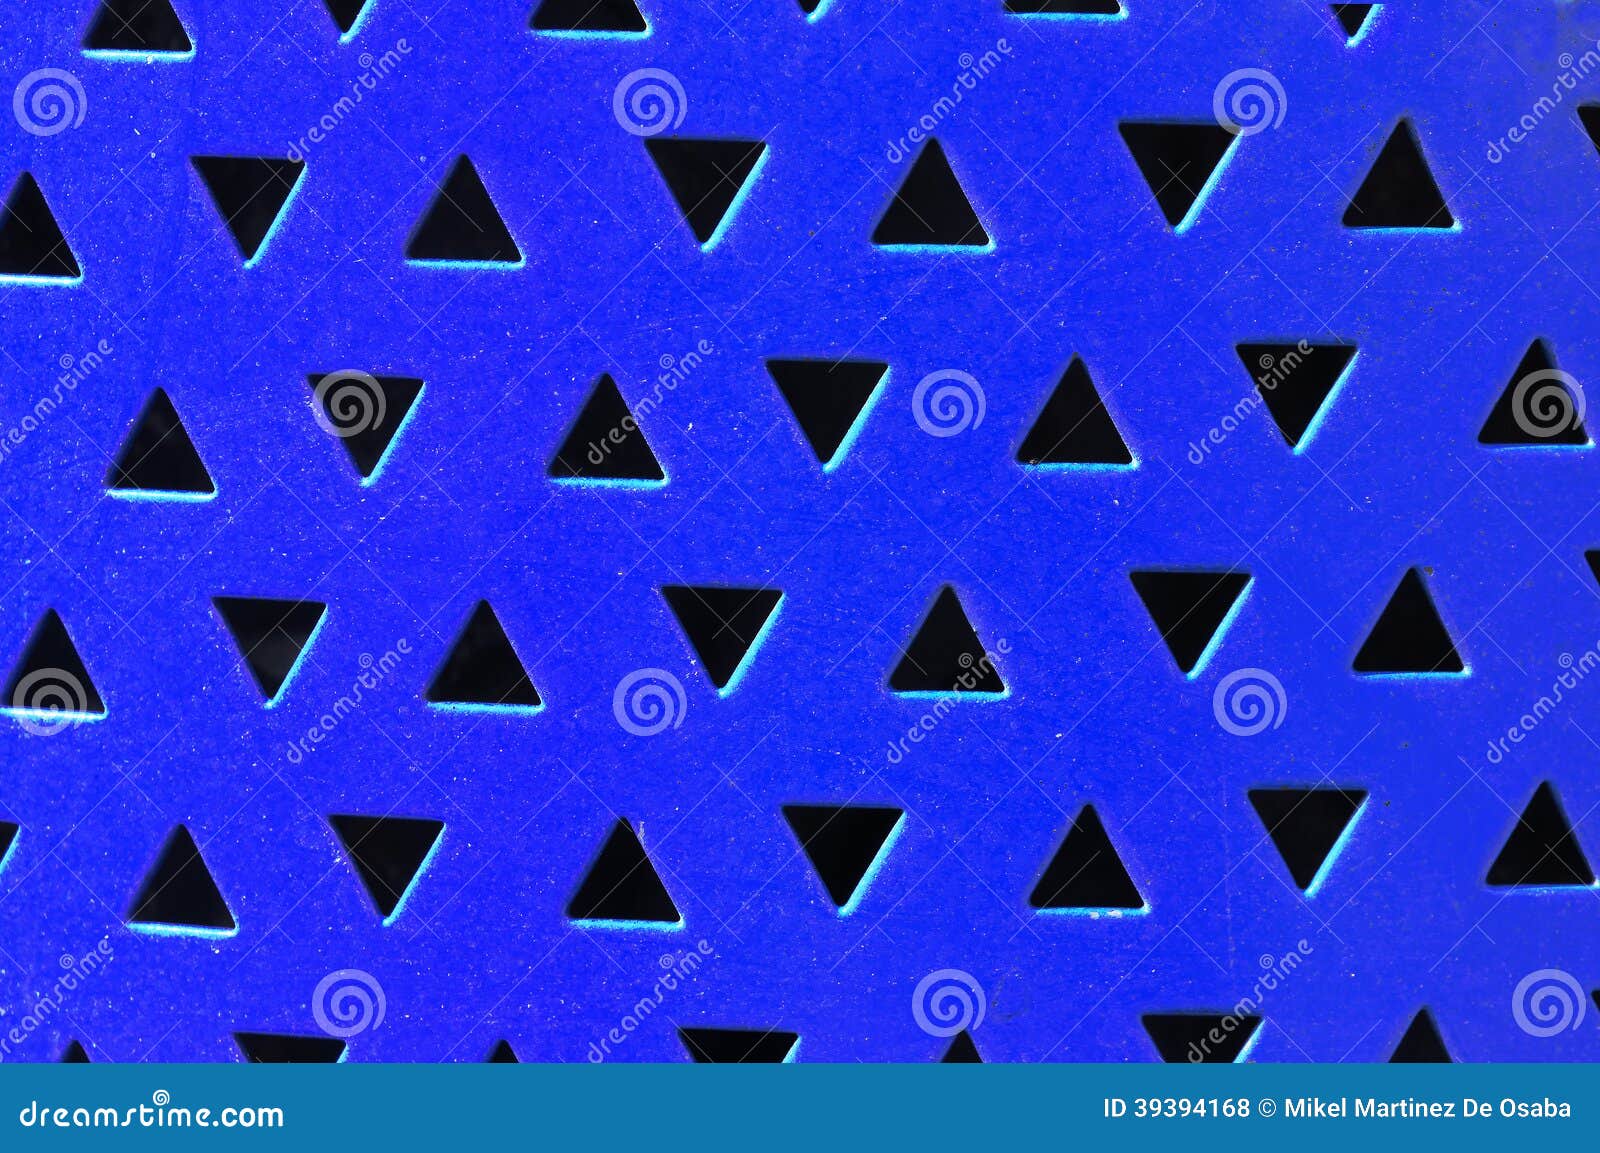 metallic texture with equilateral triangles